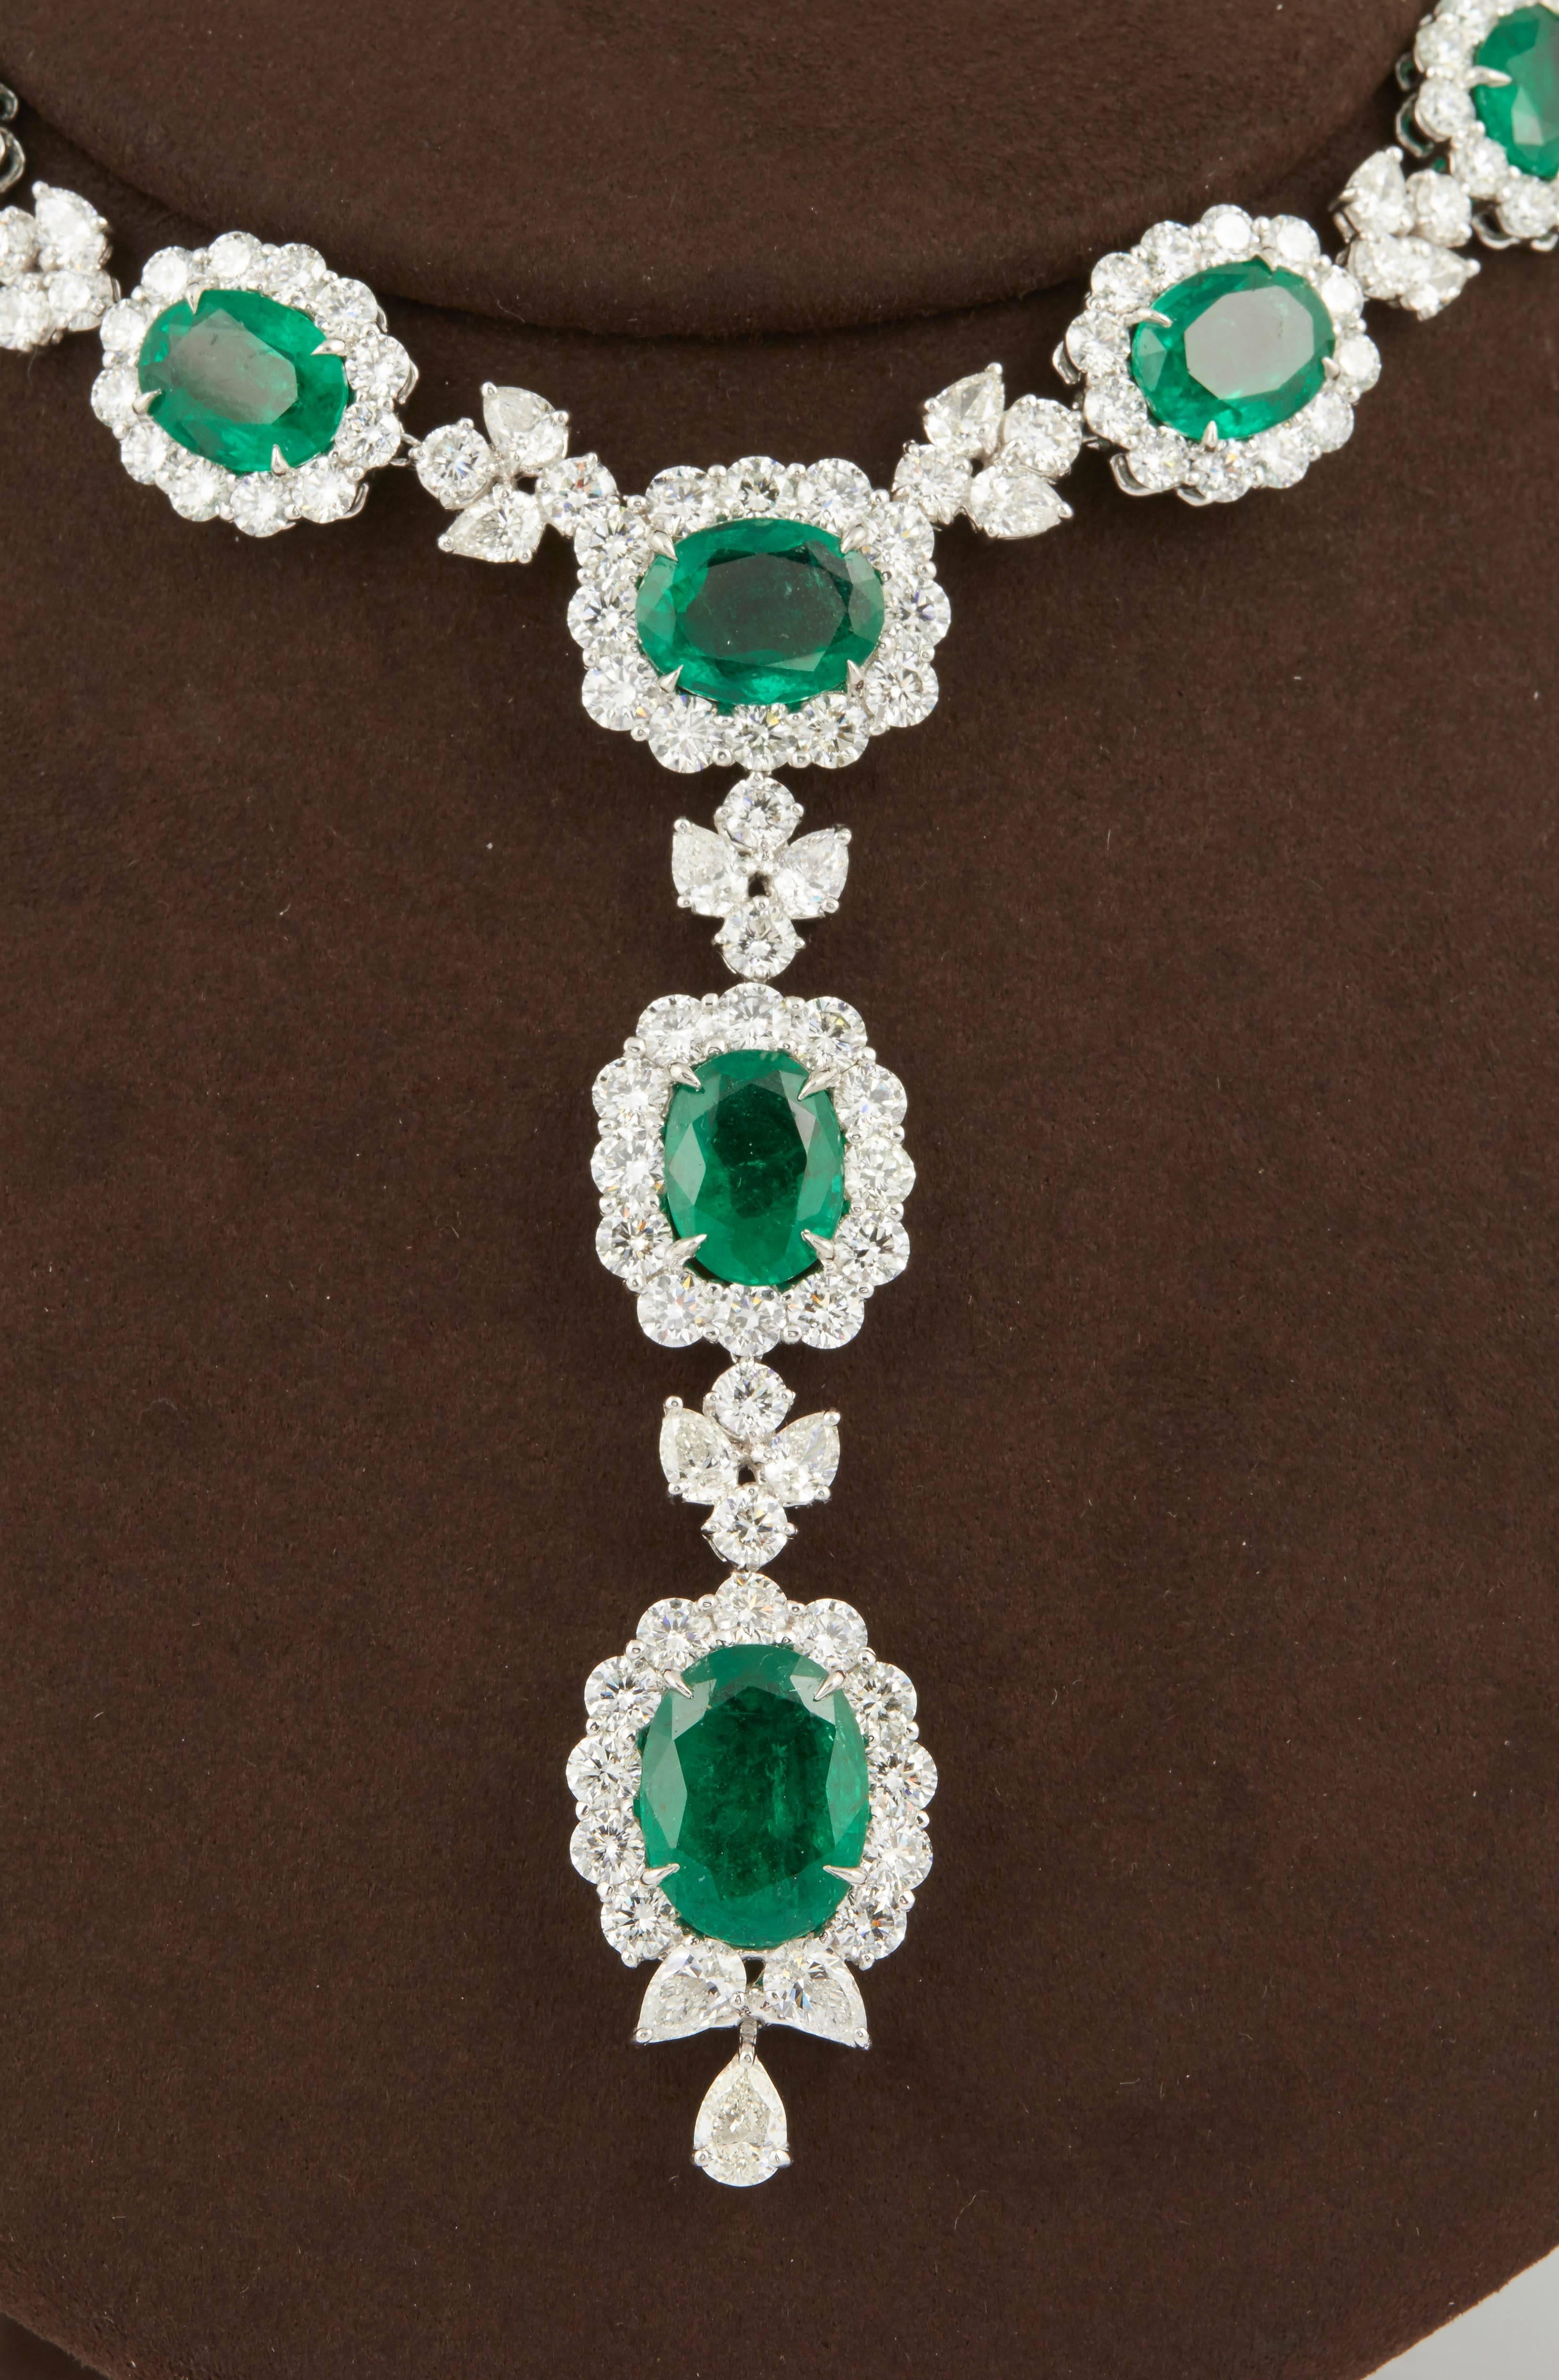 

An incredible necklace featuring high quality fine green emeralds complimented by white diamonds. 

59.50 carats of green emeralds

50.74 carats of F/G VS diamonds

Platinum

Approximately 17 inch neck size that can be adjusted if necessary. The